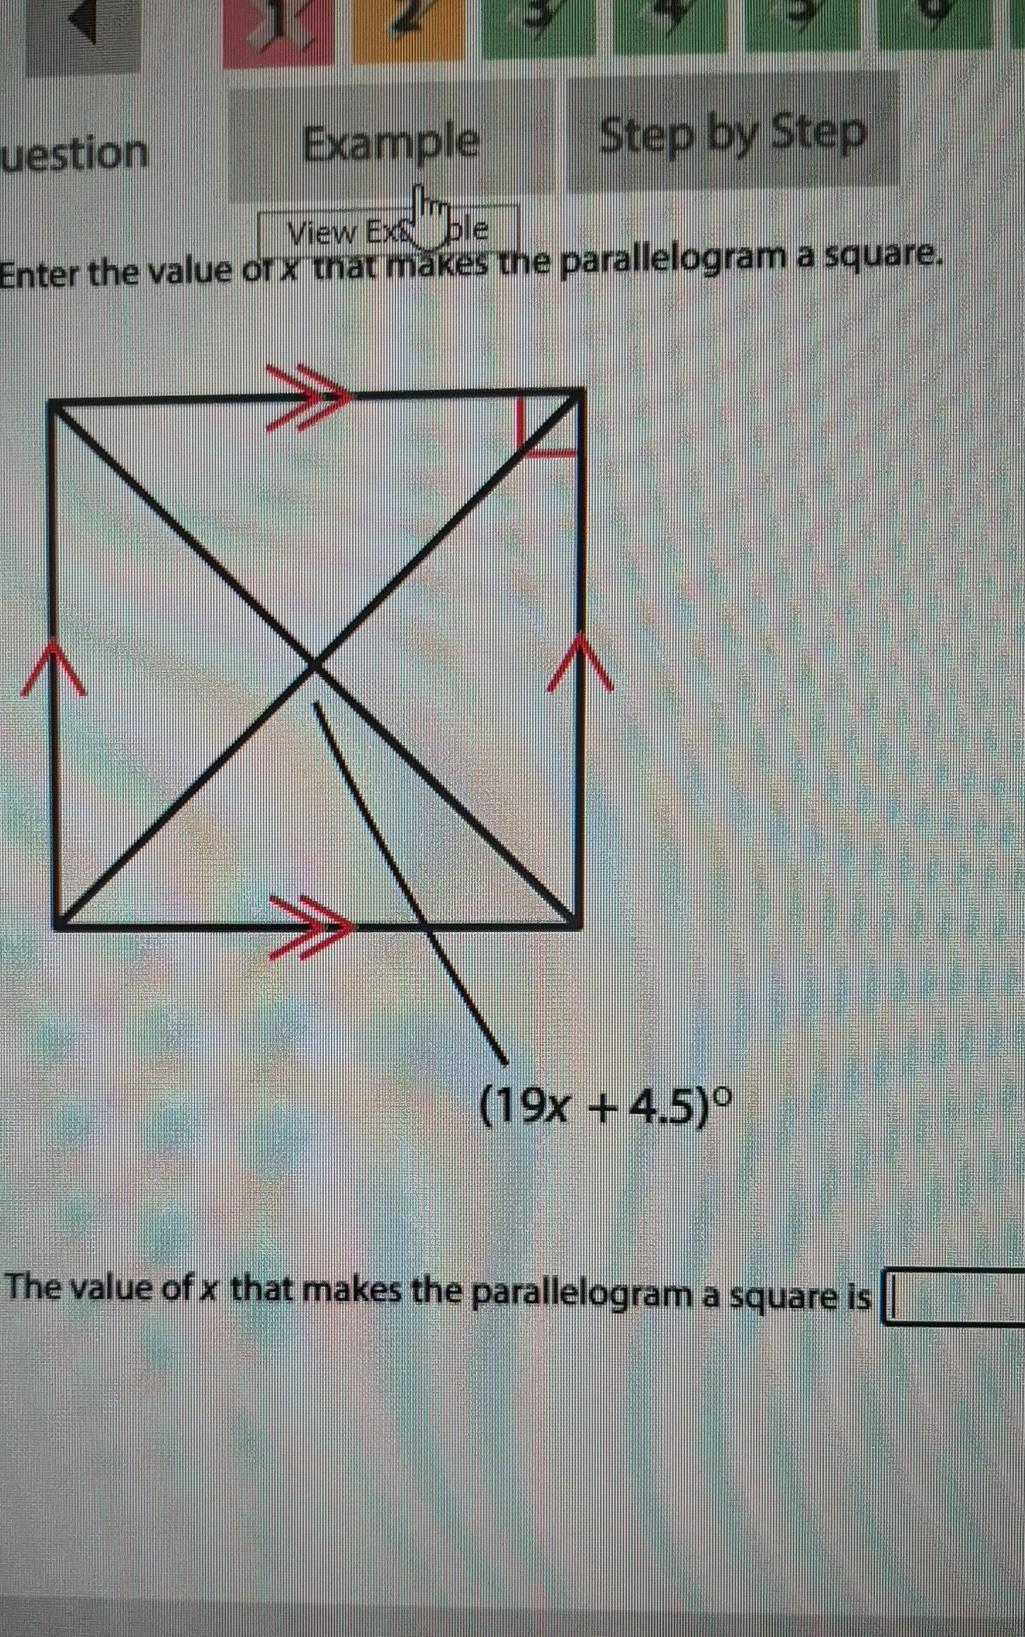 Can U Help Solve This 